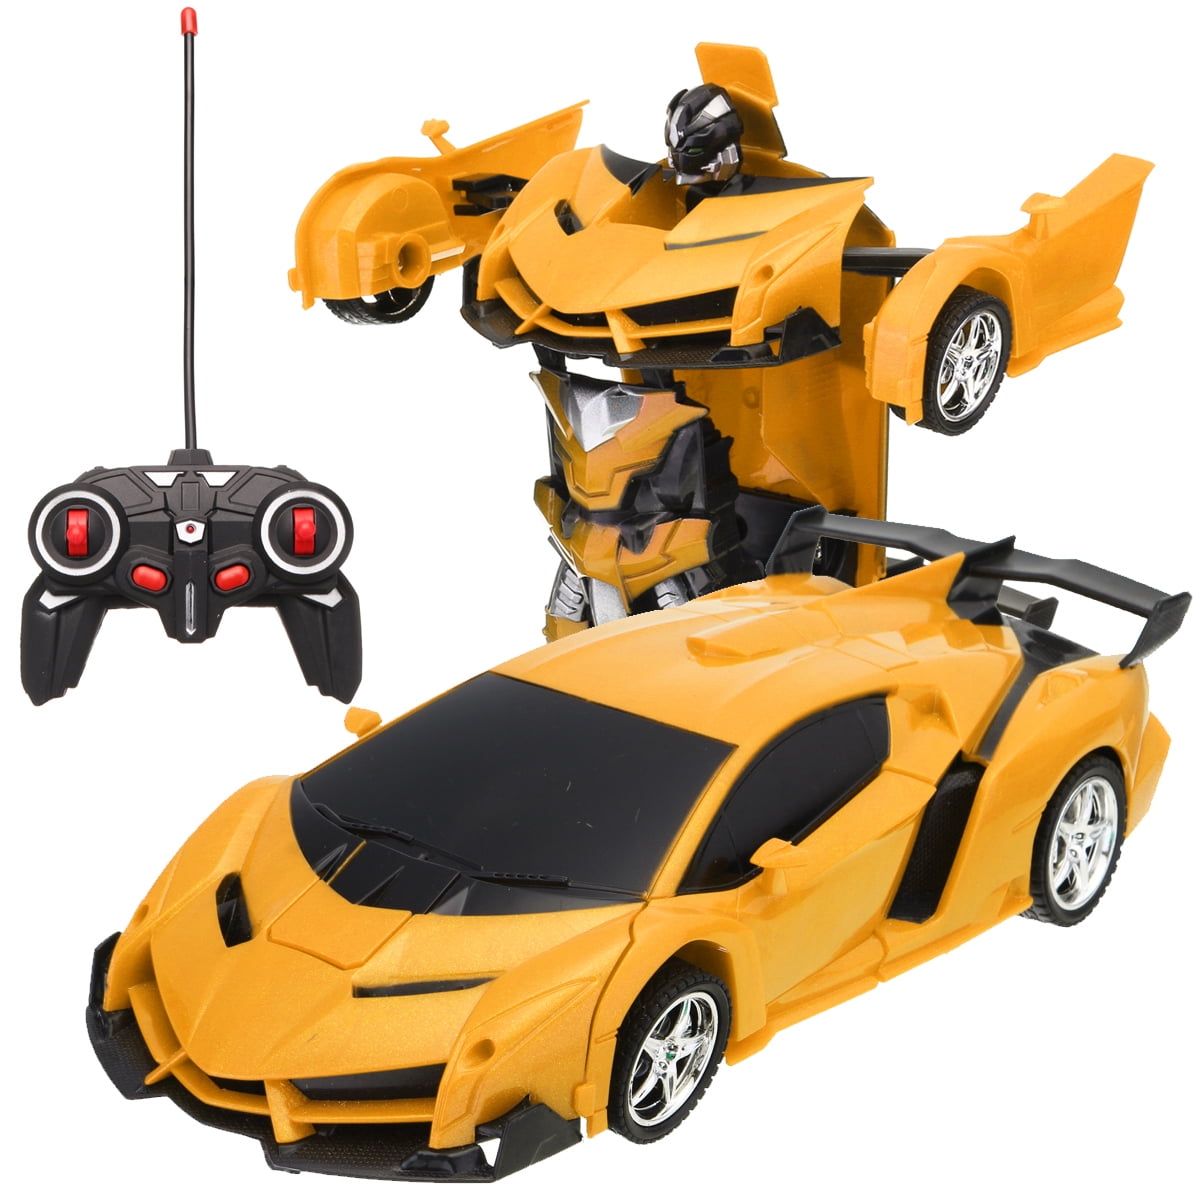 Details about   Toys RC Transformer Car Robot Toy for Kids Birthday Gift Boy Remote Control Car 